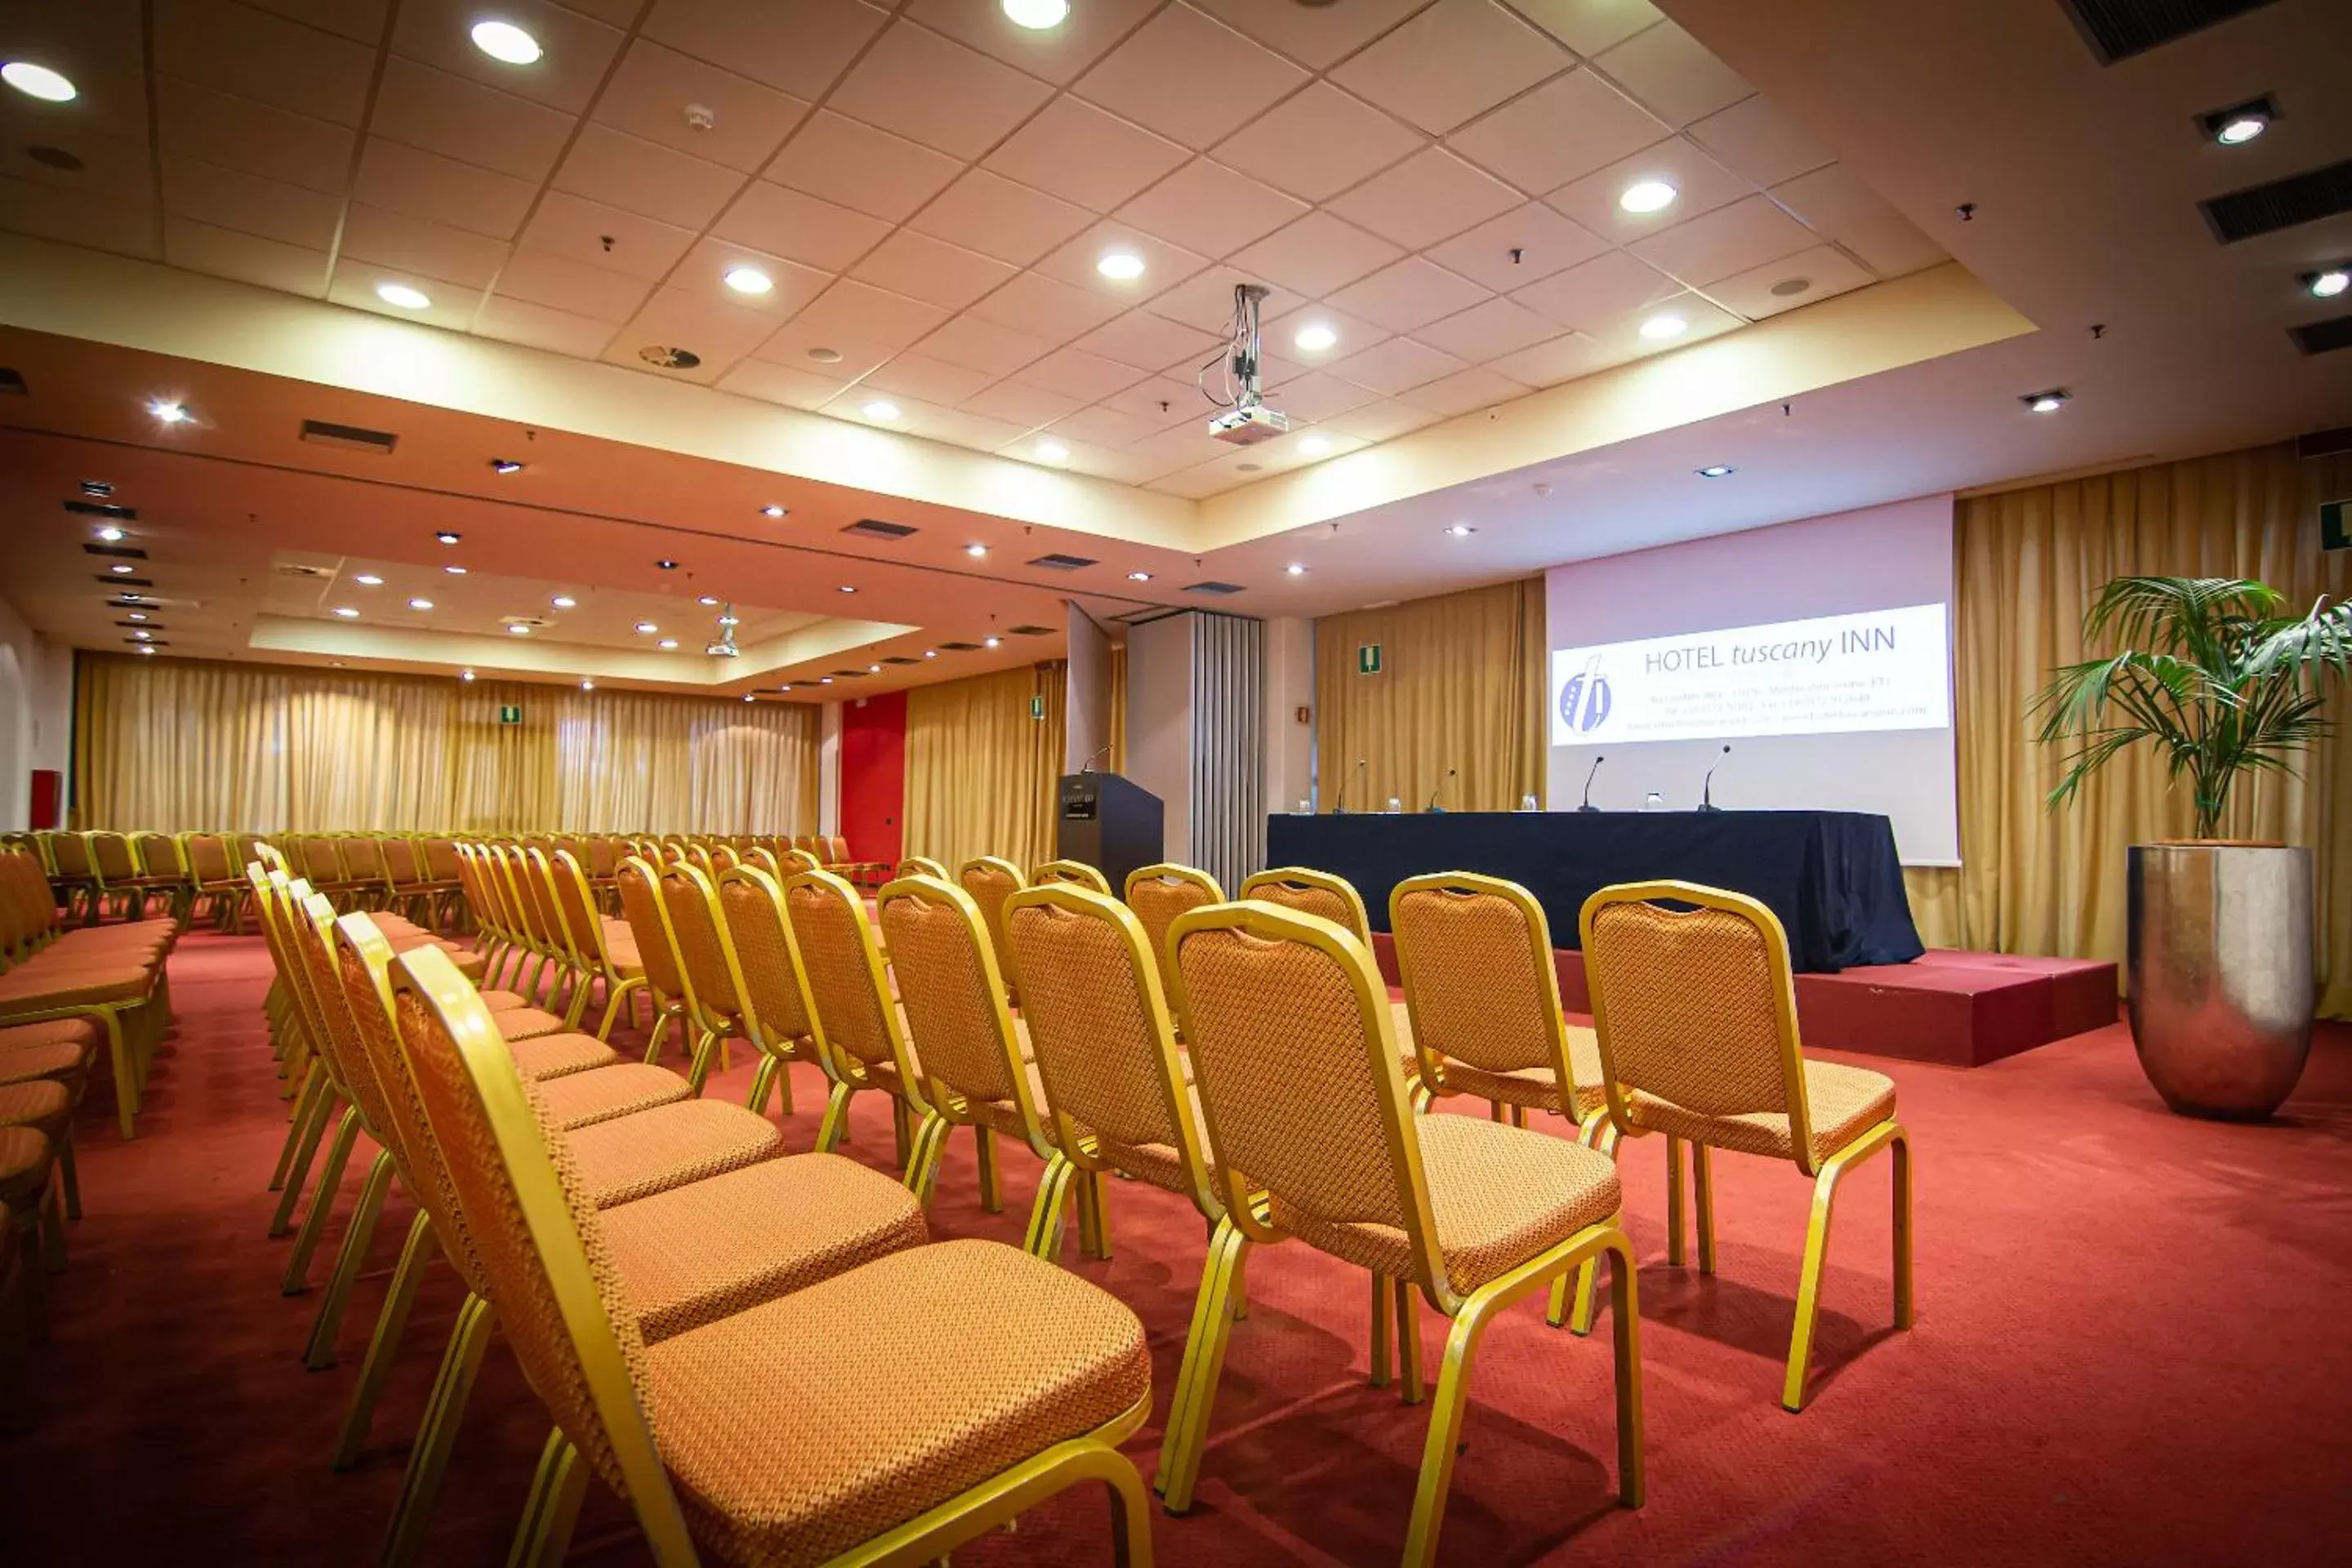 Business facilities in Tuscany Inn